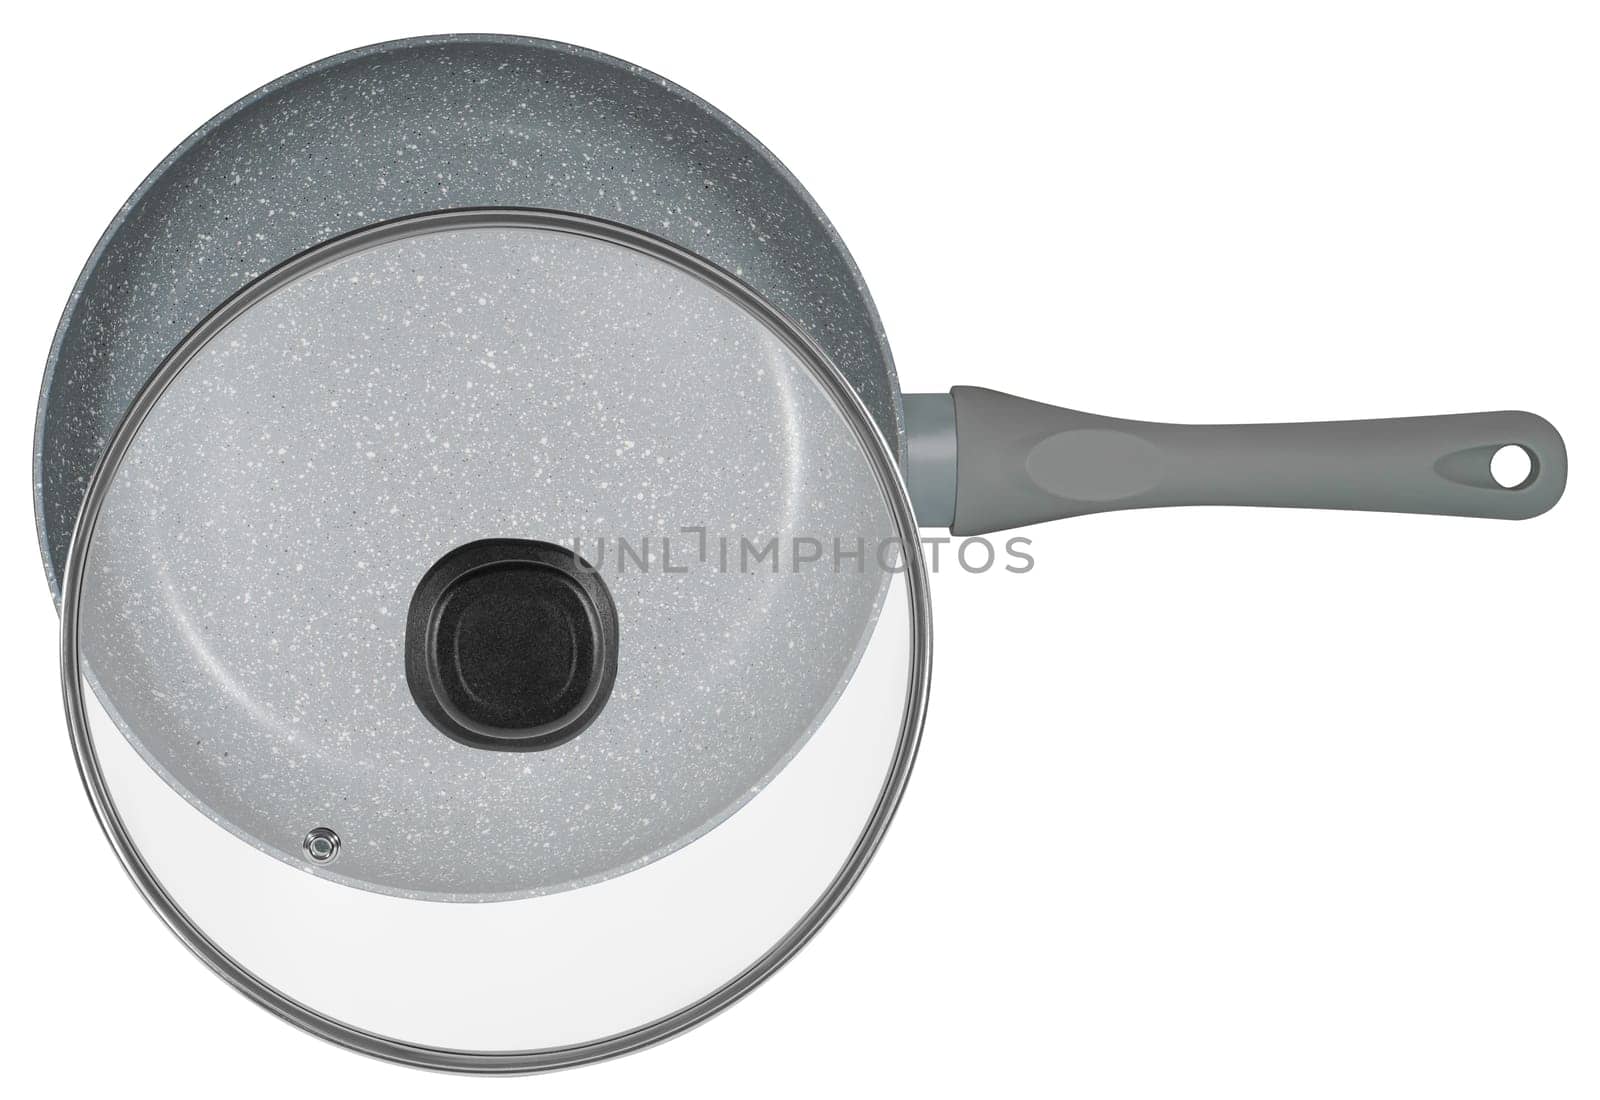 non-stick ceramic frying pan with glass lid, white in insulation by A_A